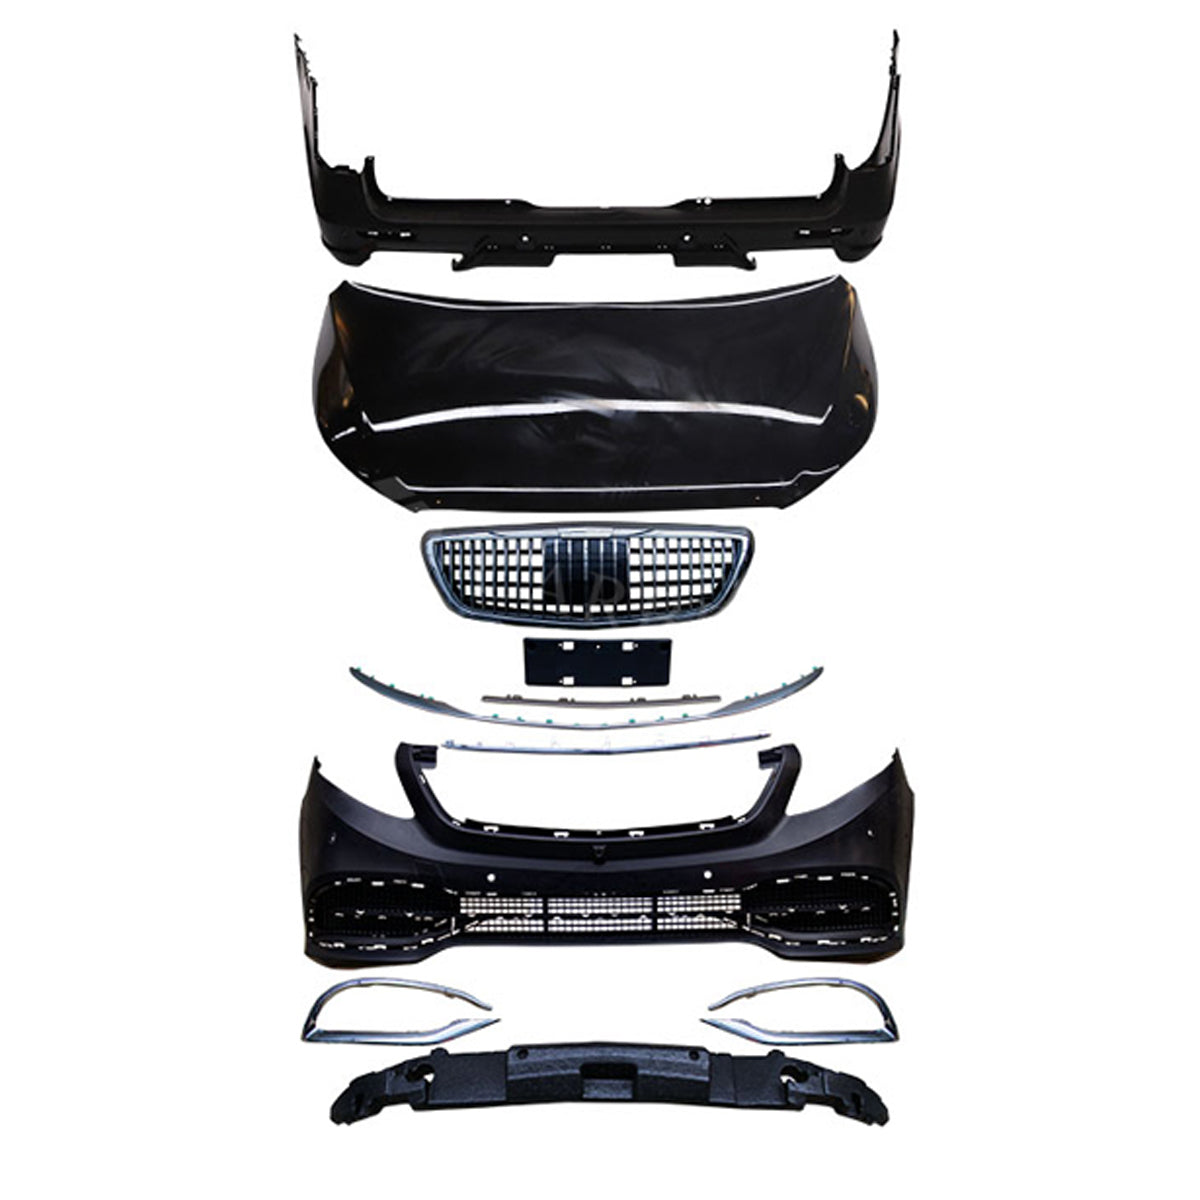 BODY KIT FOR V-CLASS W447 2016-2020 UPGRADE TO W222 MAYBACH TYPE(A TYPE)